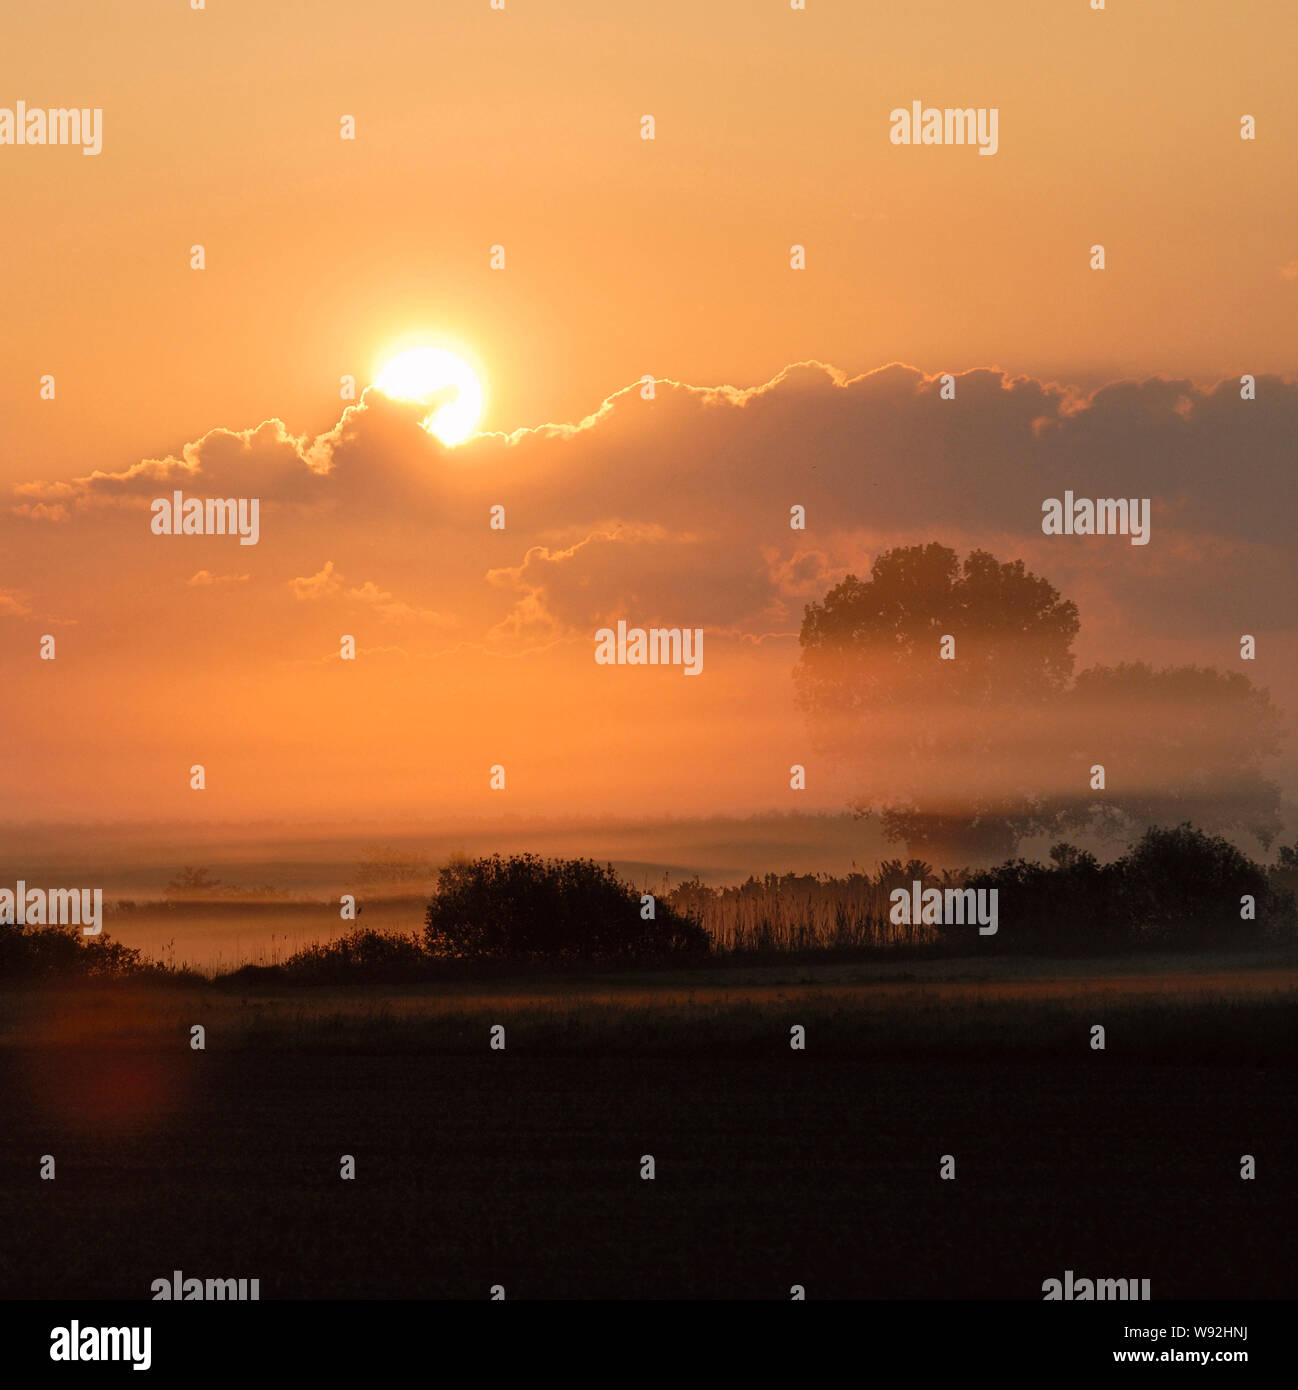 Sunrise above wet meadows and lines of trees and bushes, rural countryside, sun shining on morning mist, morning mood full of atmosphere. Stock Photo